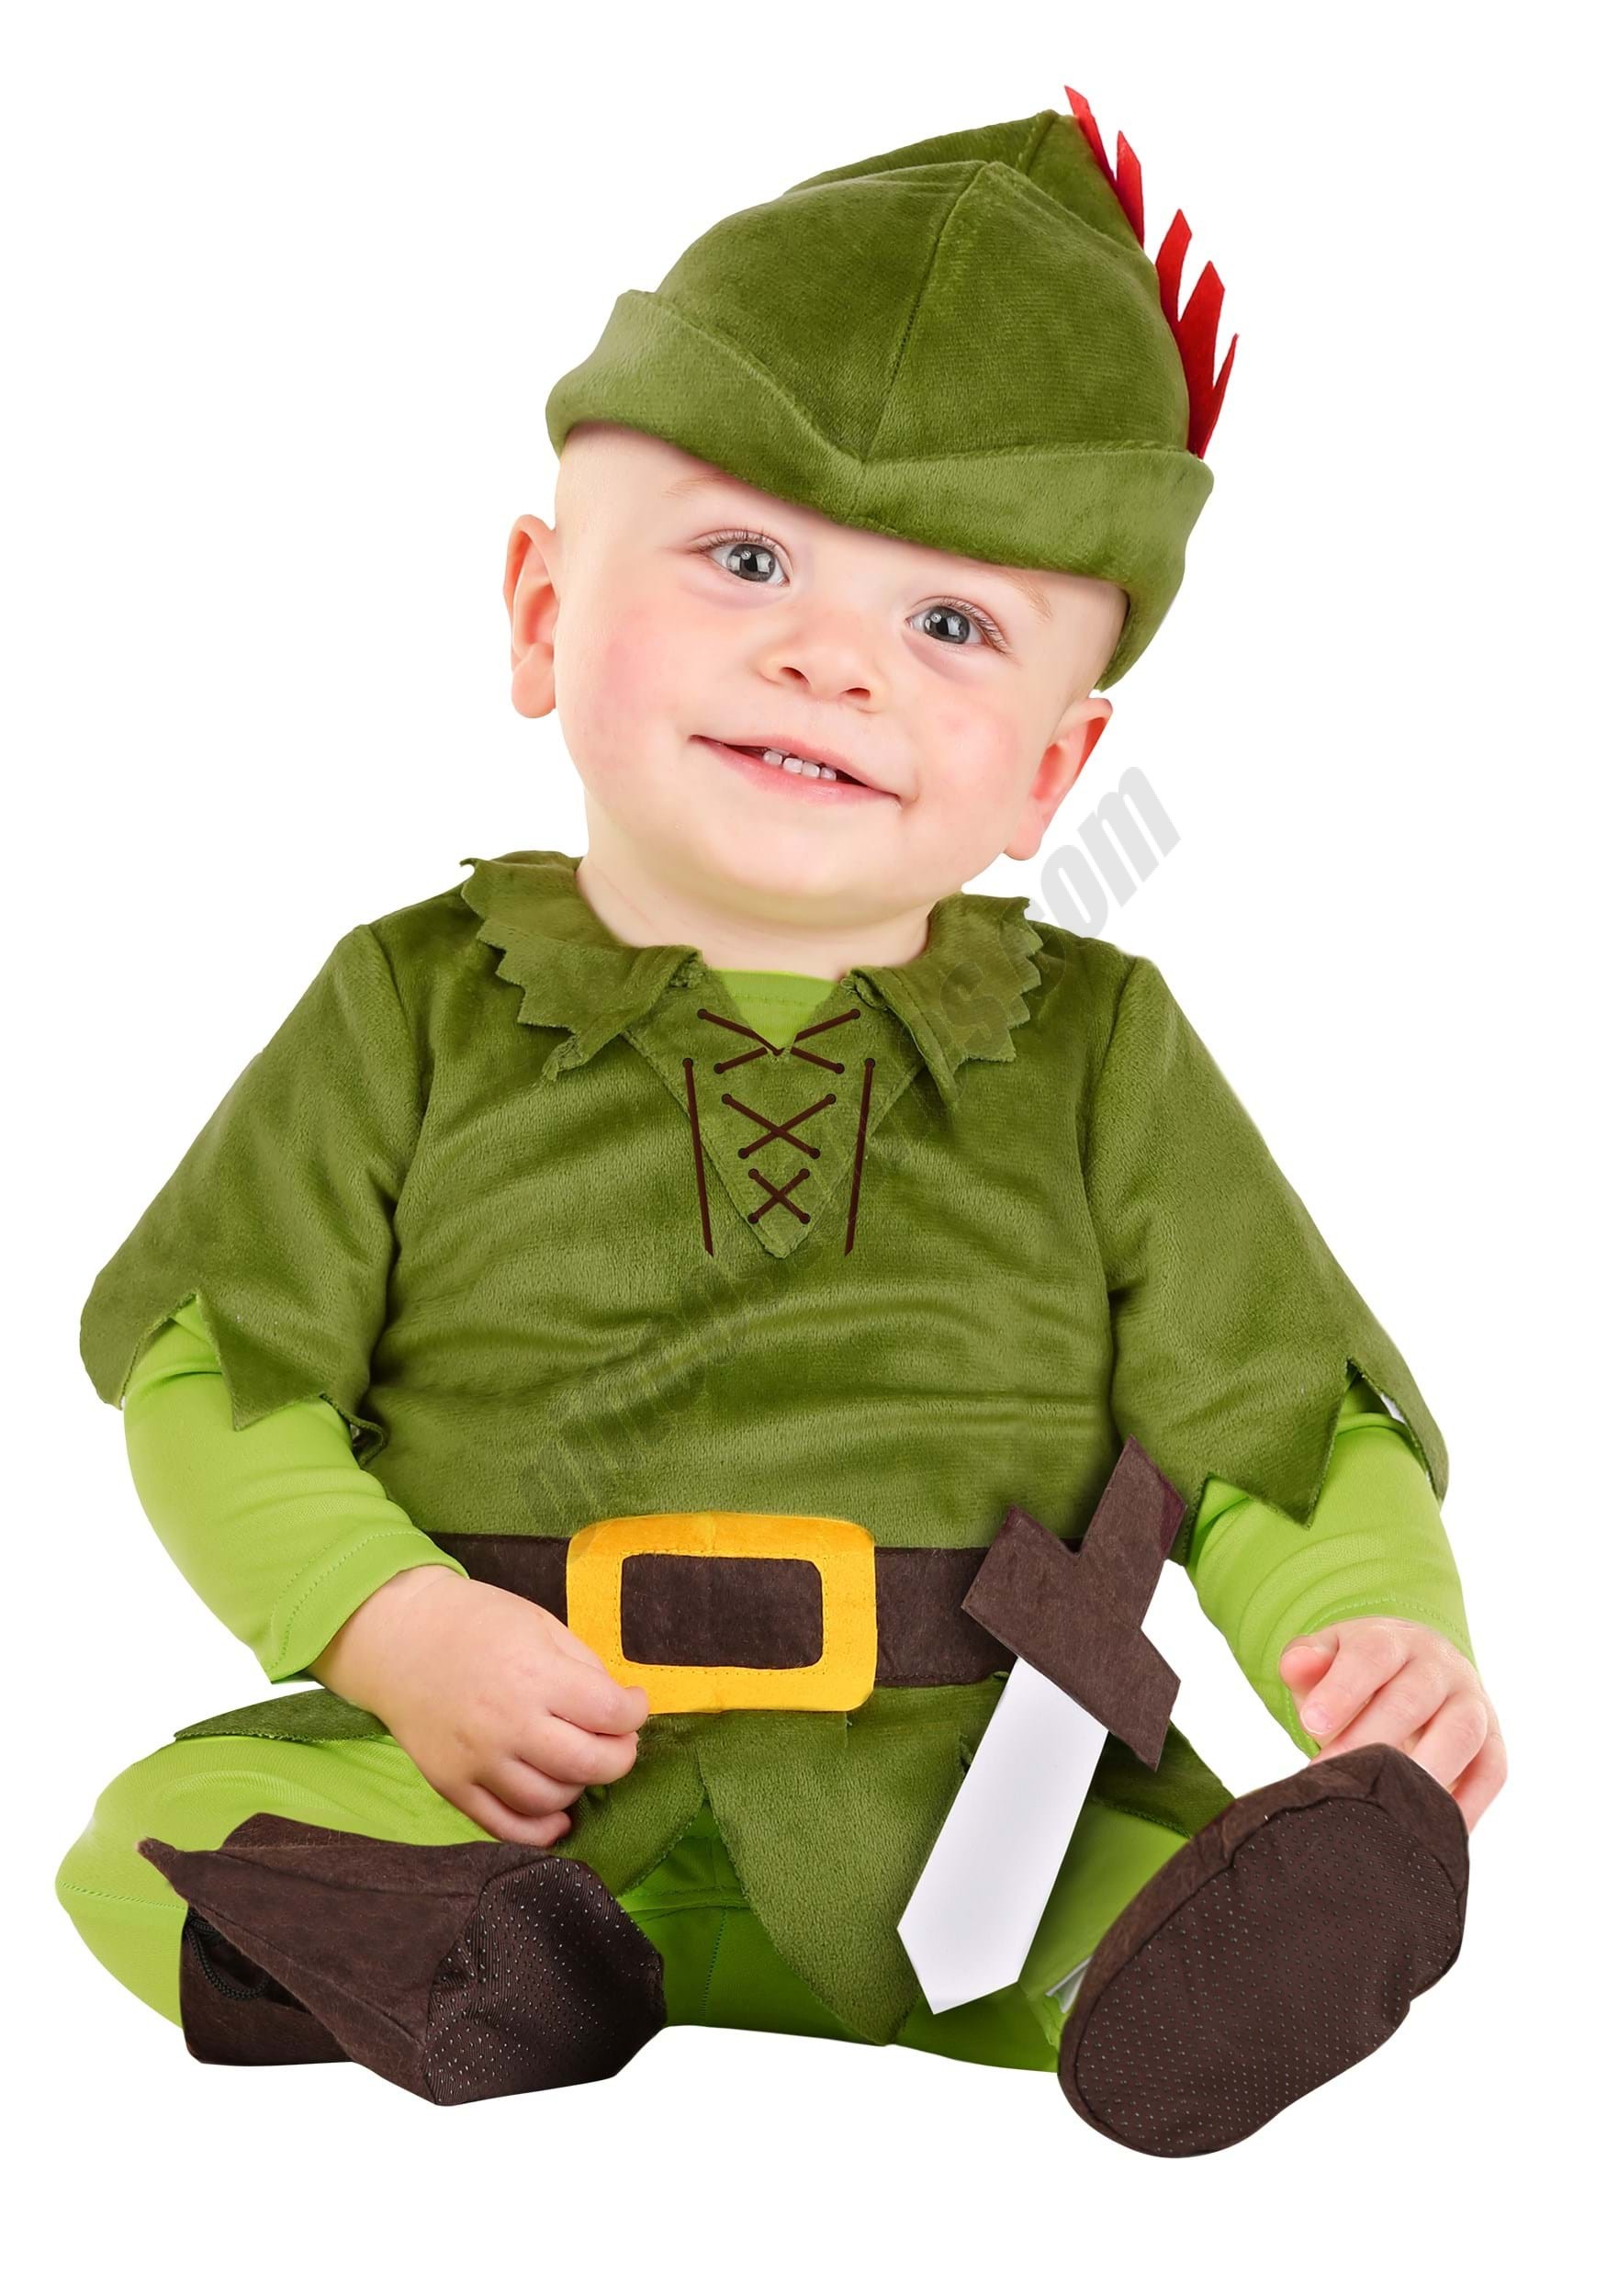 Peter Pan Costume for Infants Promotions - Peter Pan Costume for Infants Promotions